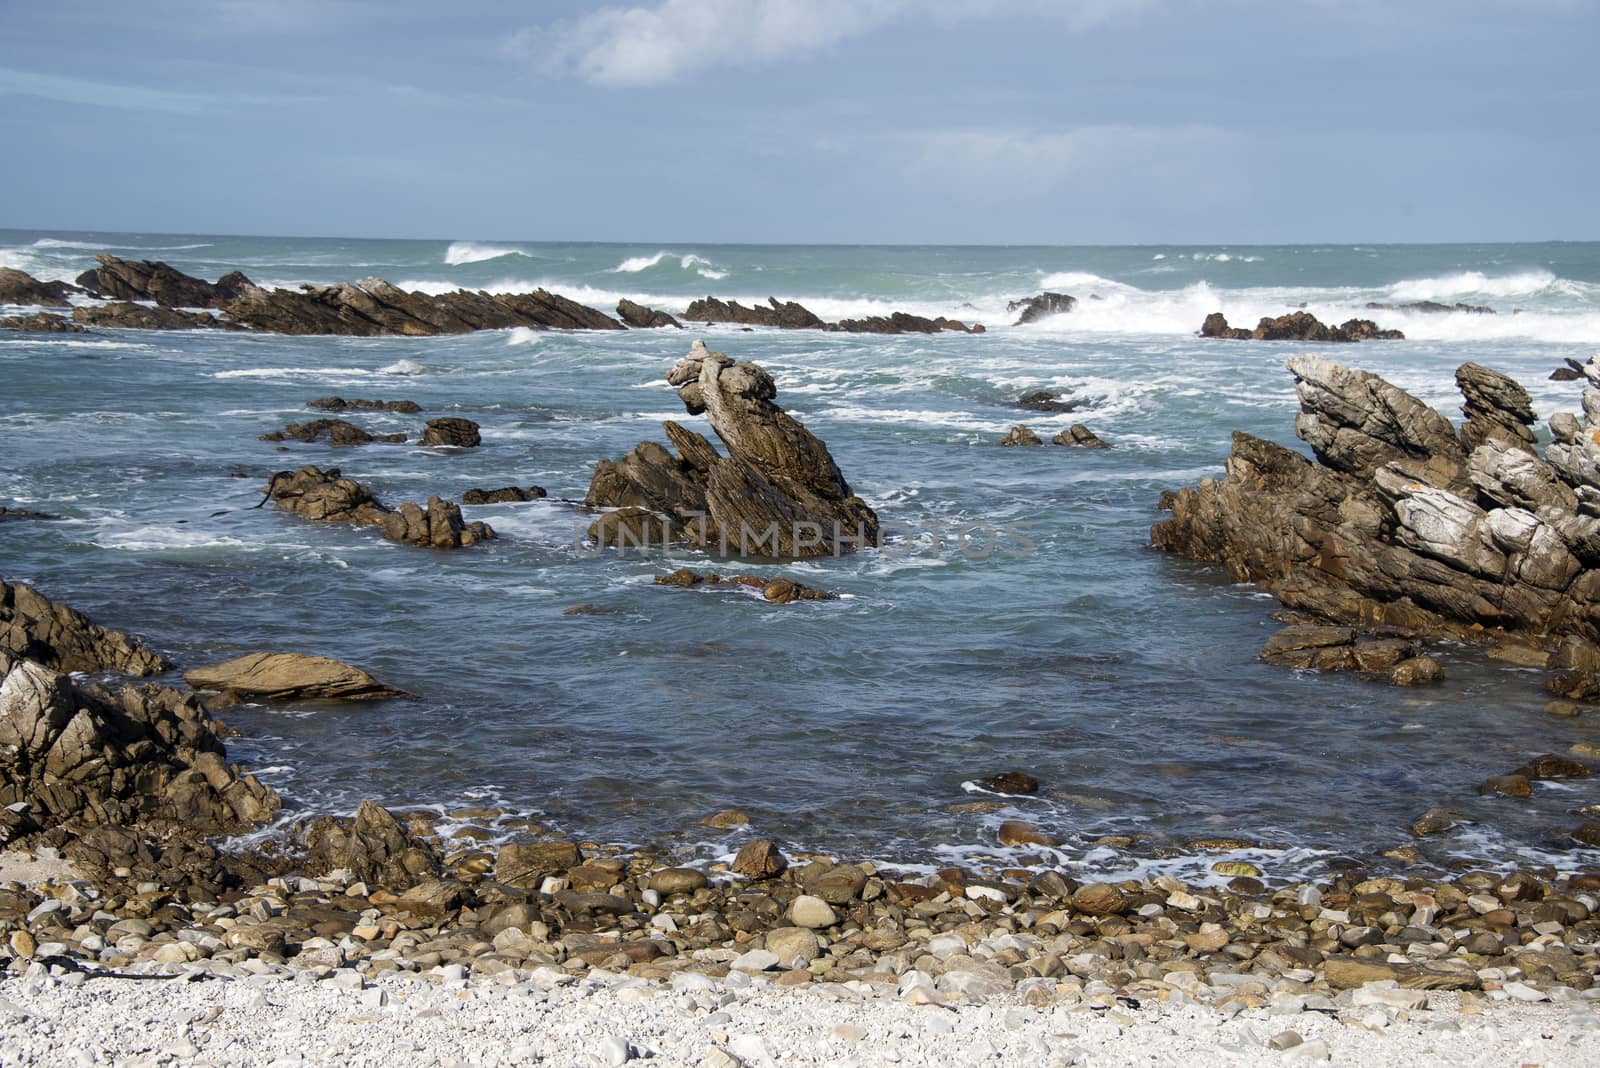 Waves breaking on rocks at Cape Agulhas